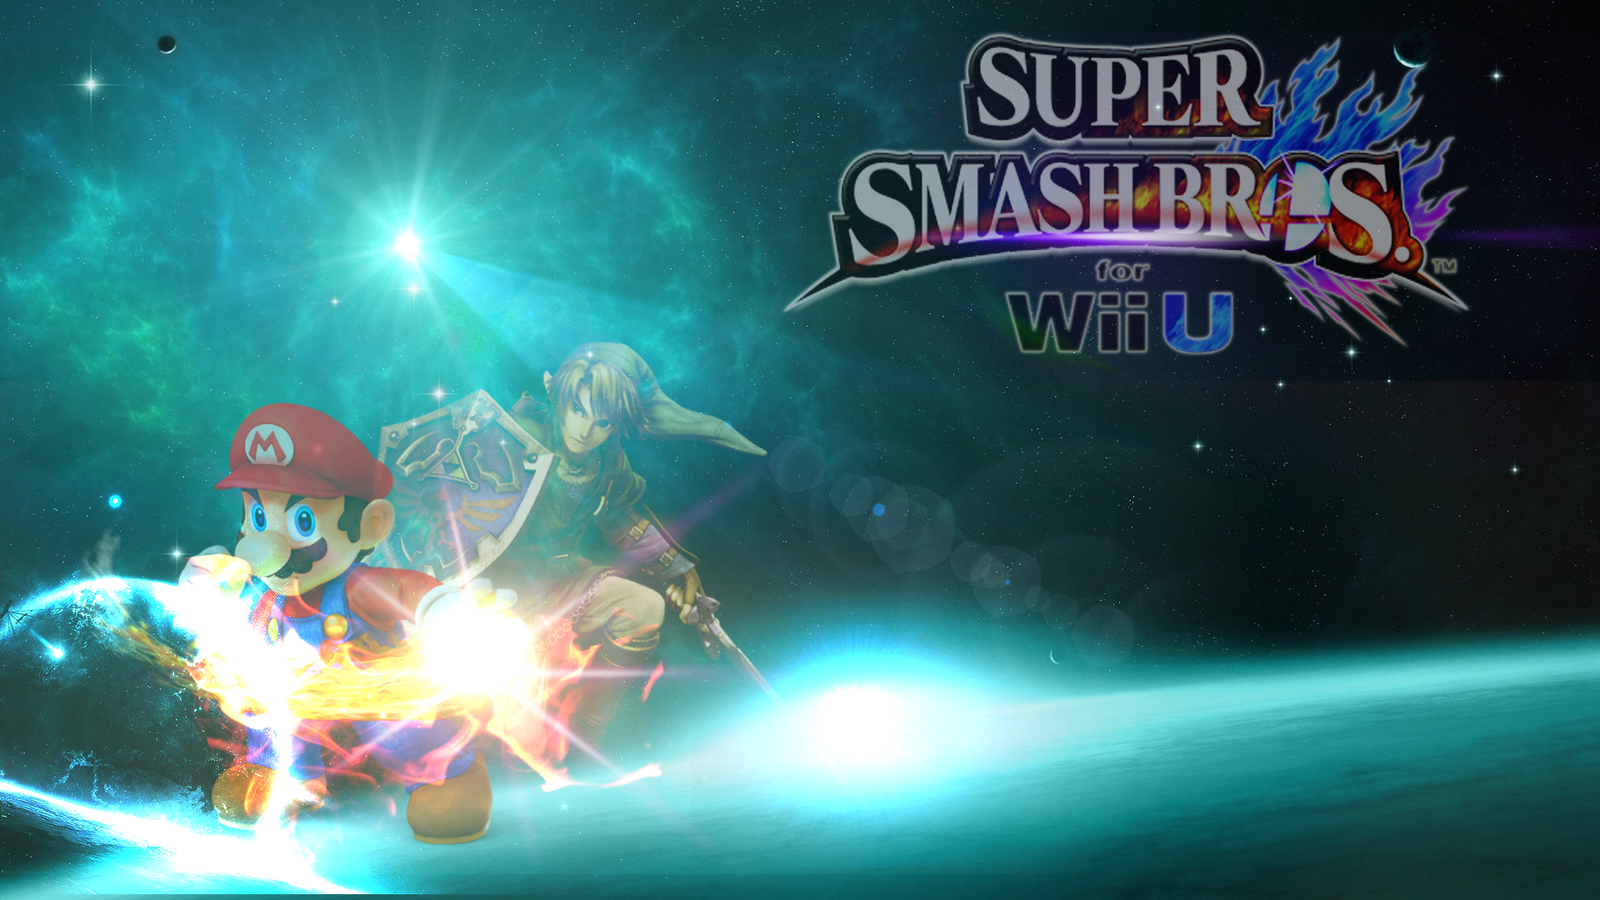 super_smash_bros_wii_u__wallpaper_hd__1920_x_1080__by_reymysterio79907-d68ob58.png